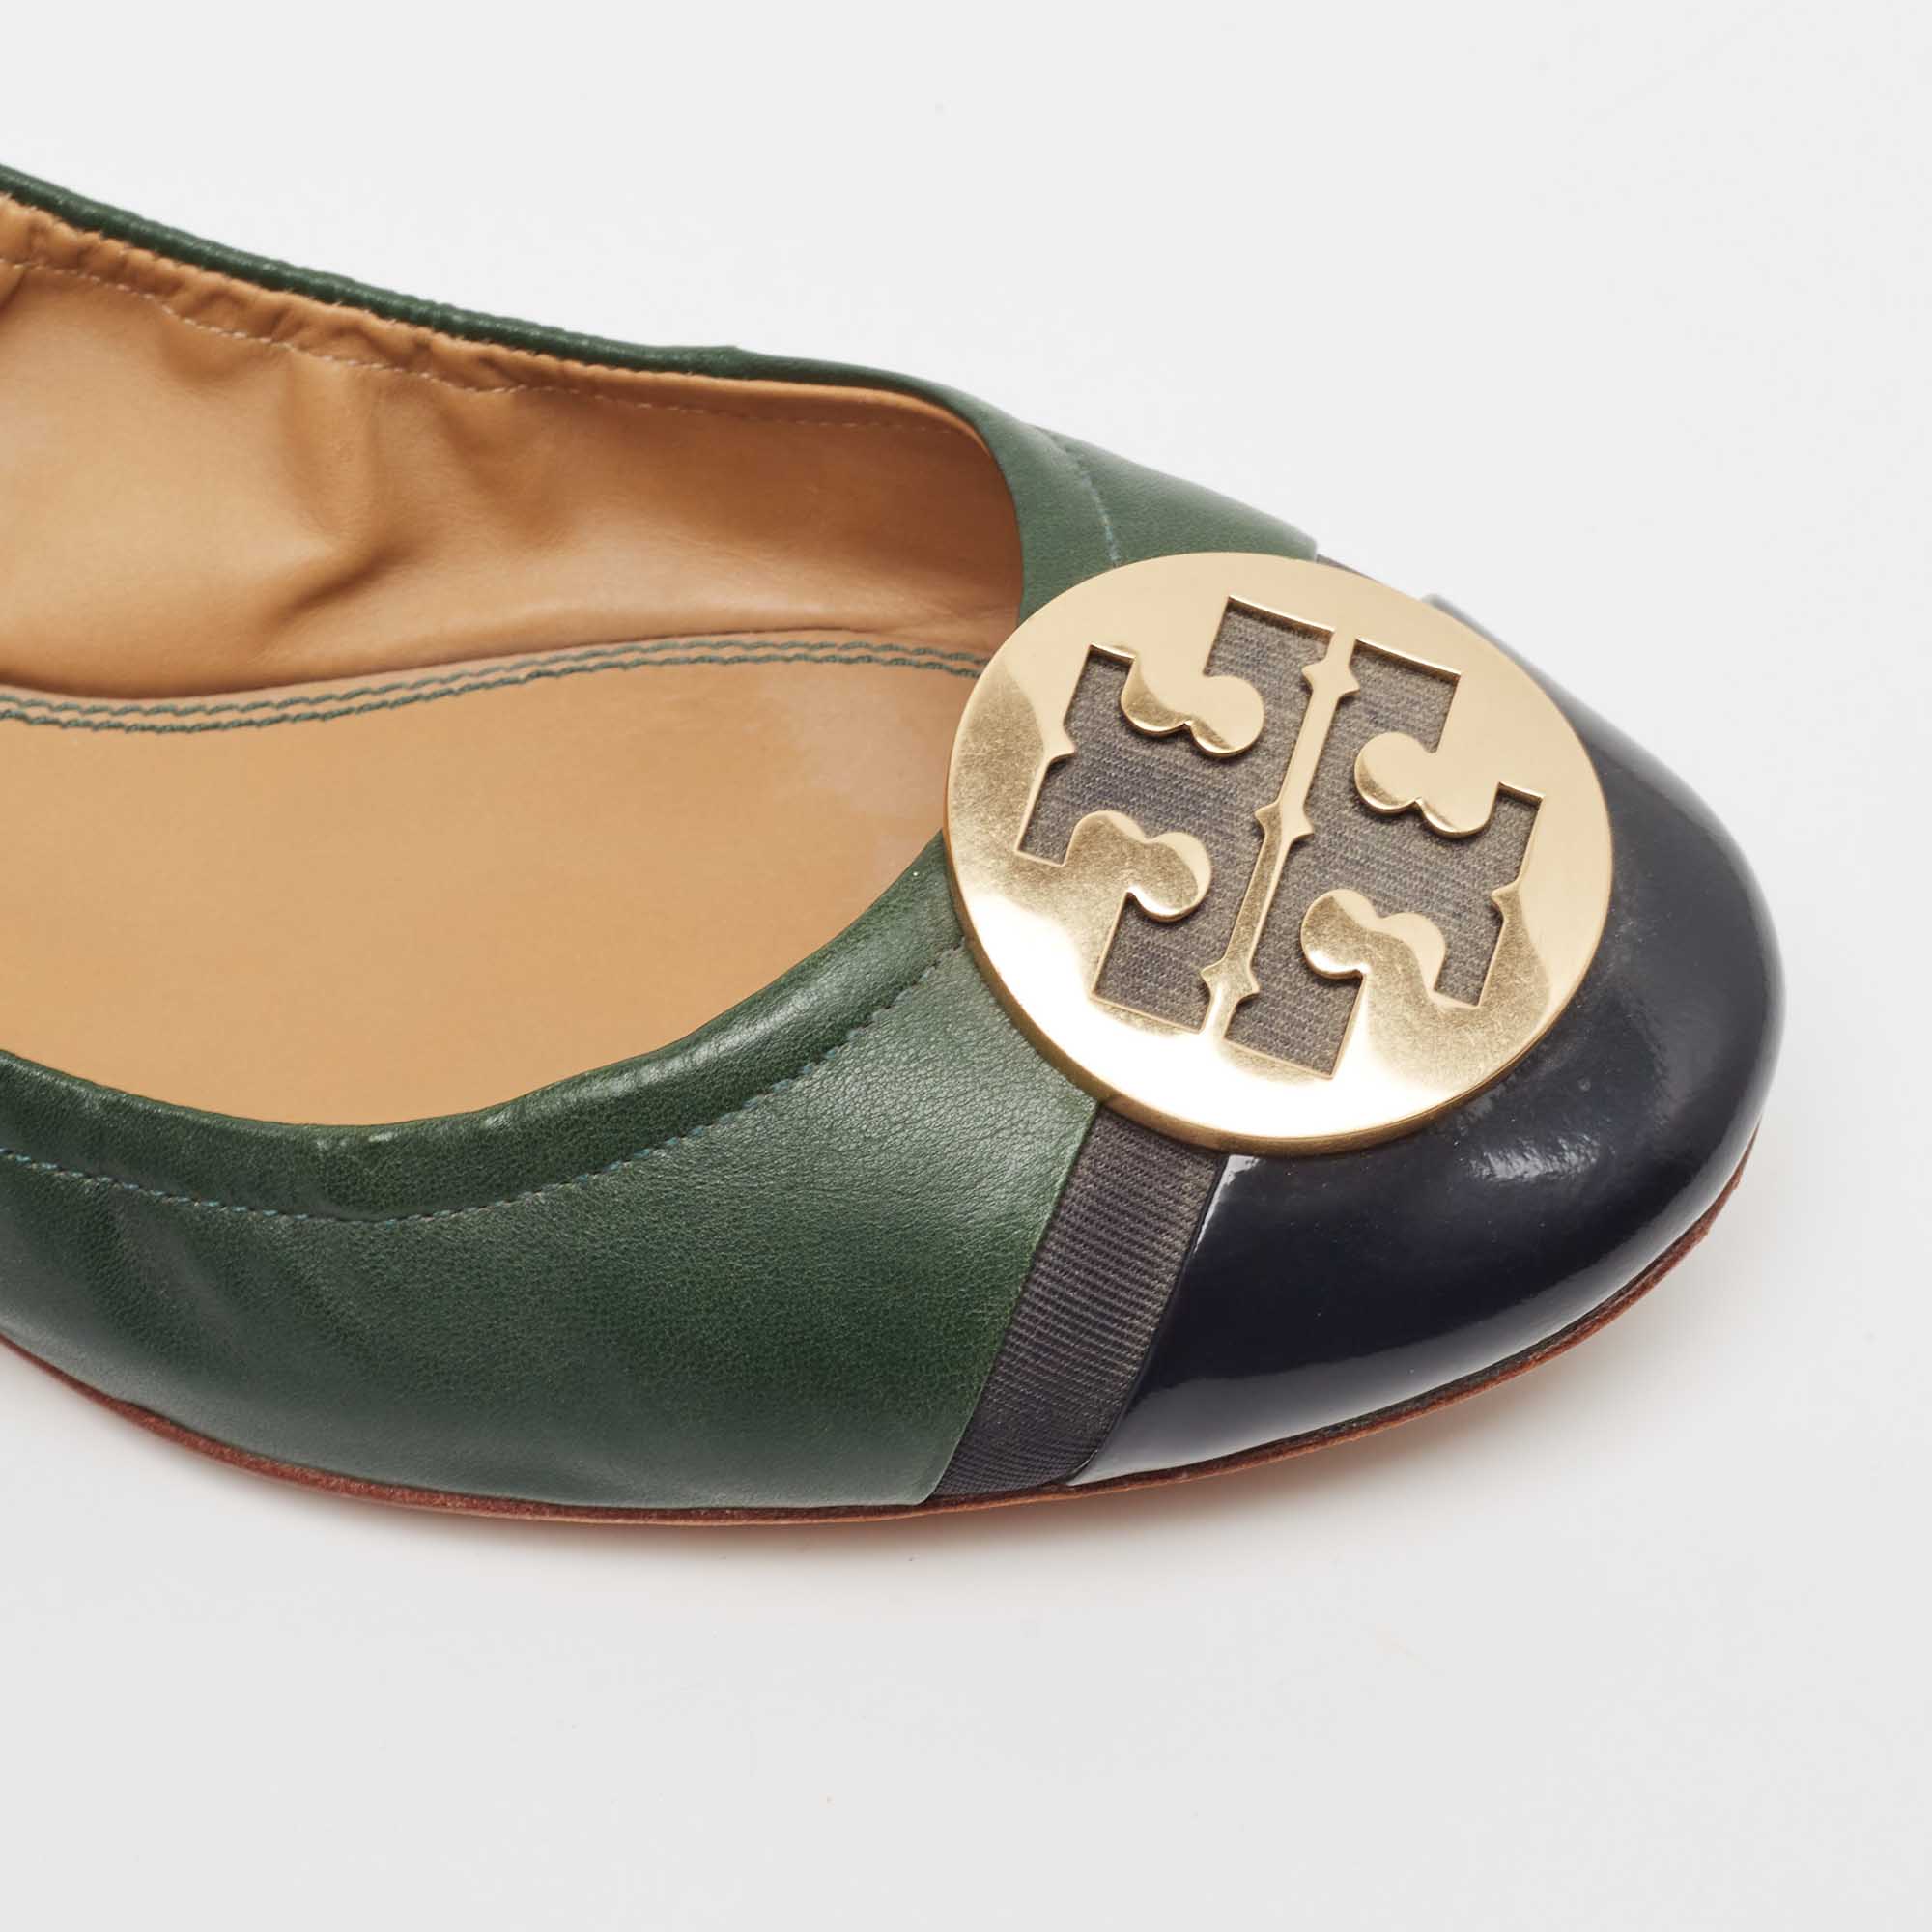 Tory Burch Green/Black Leather And Patent Leather Cap Toe Ballet Flats Size 40